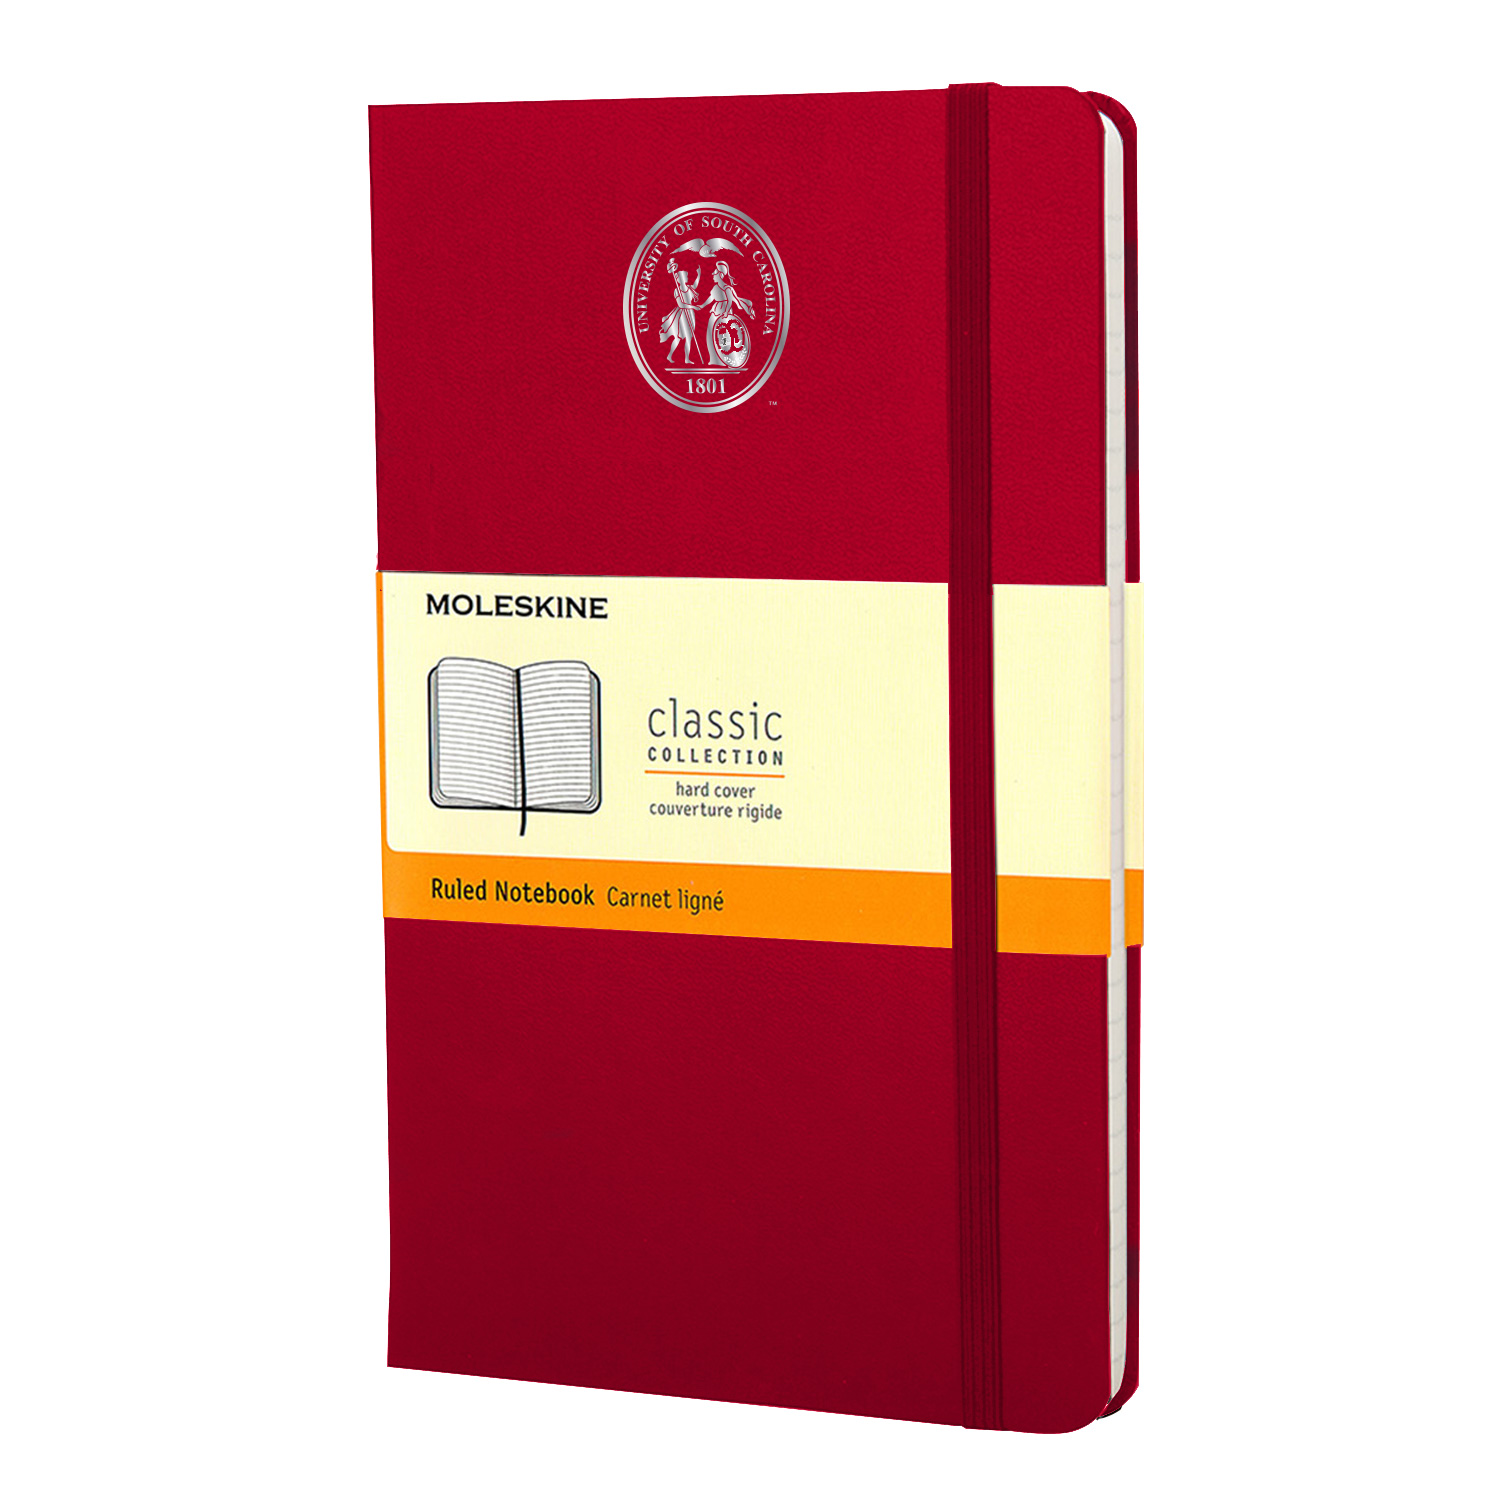 Moleskine Large Notebook With Foil Stamped Seal Ruled